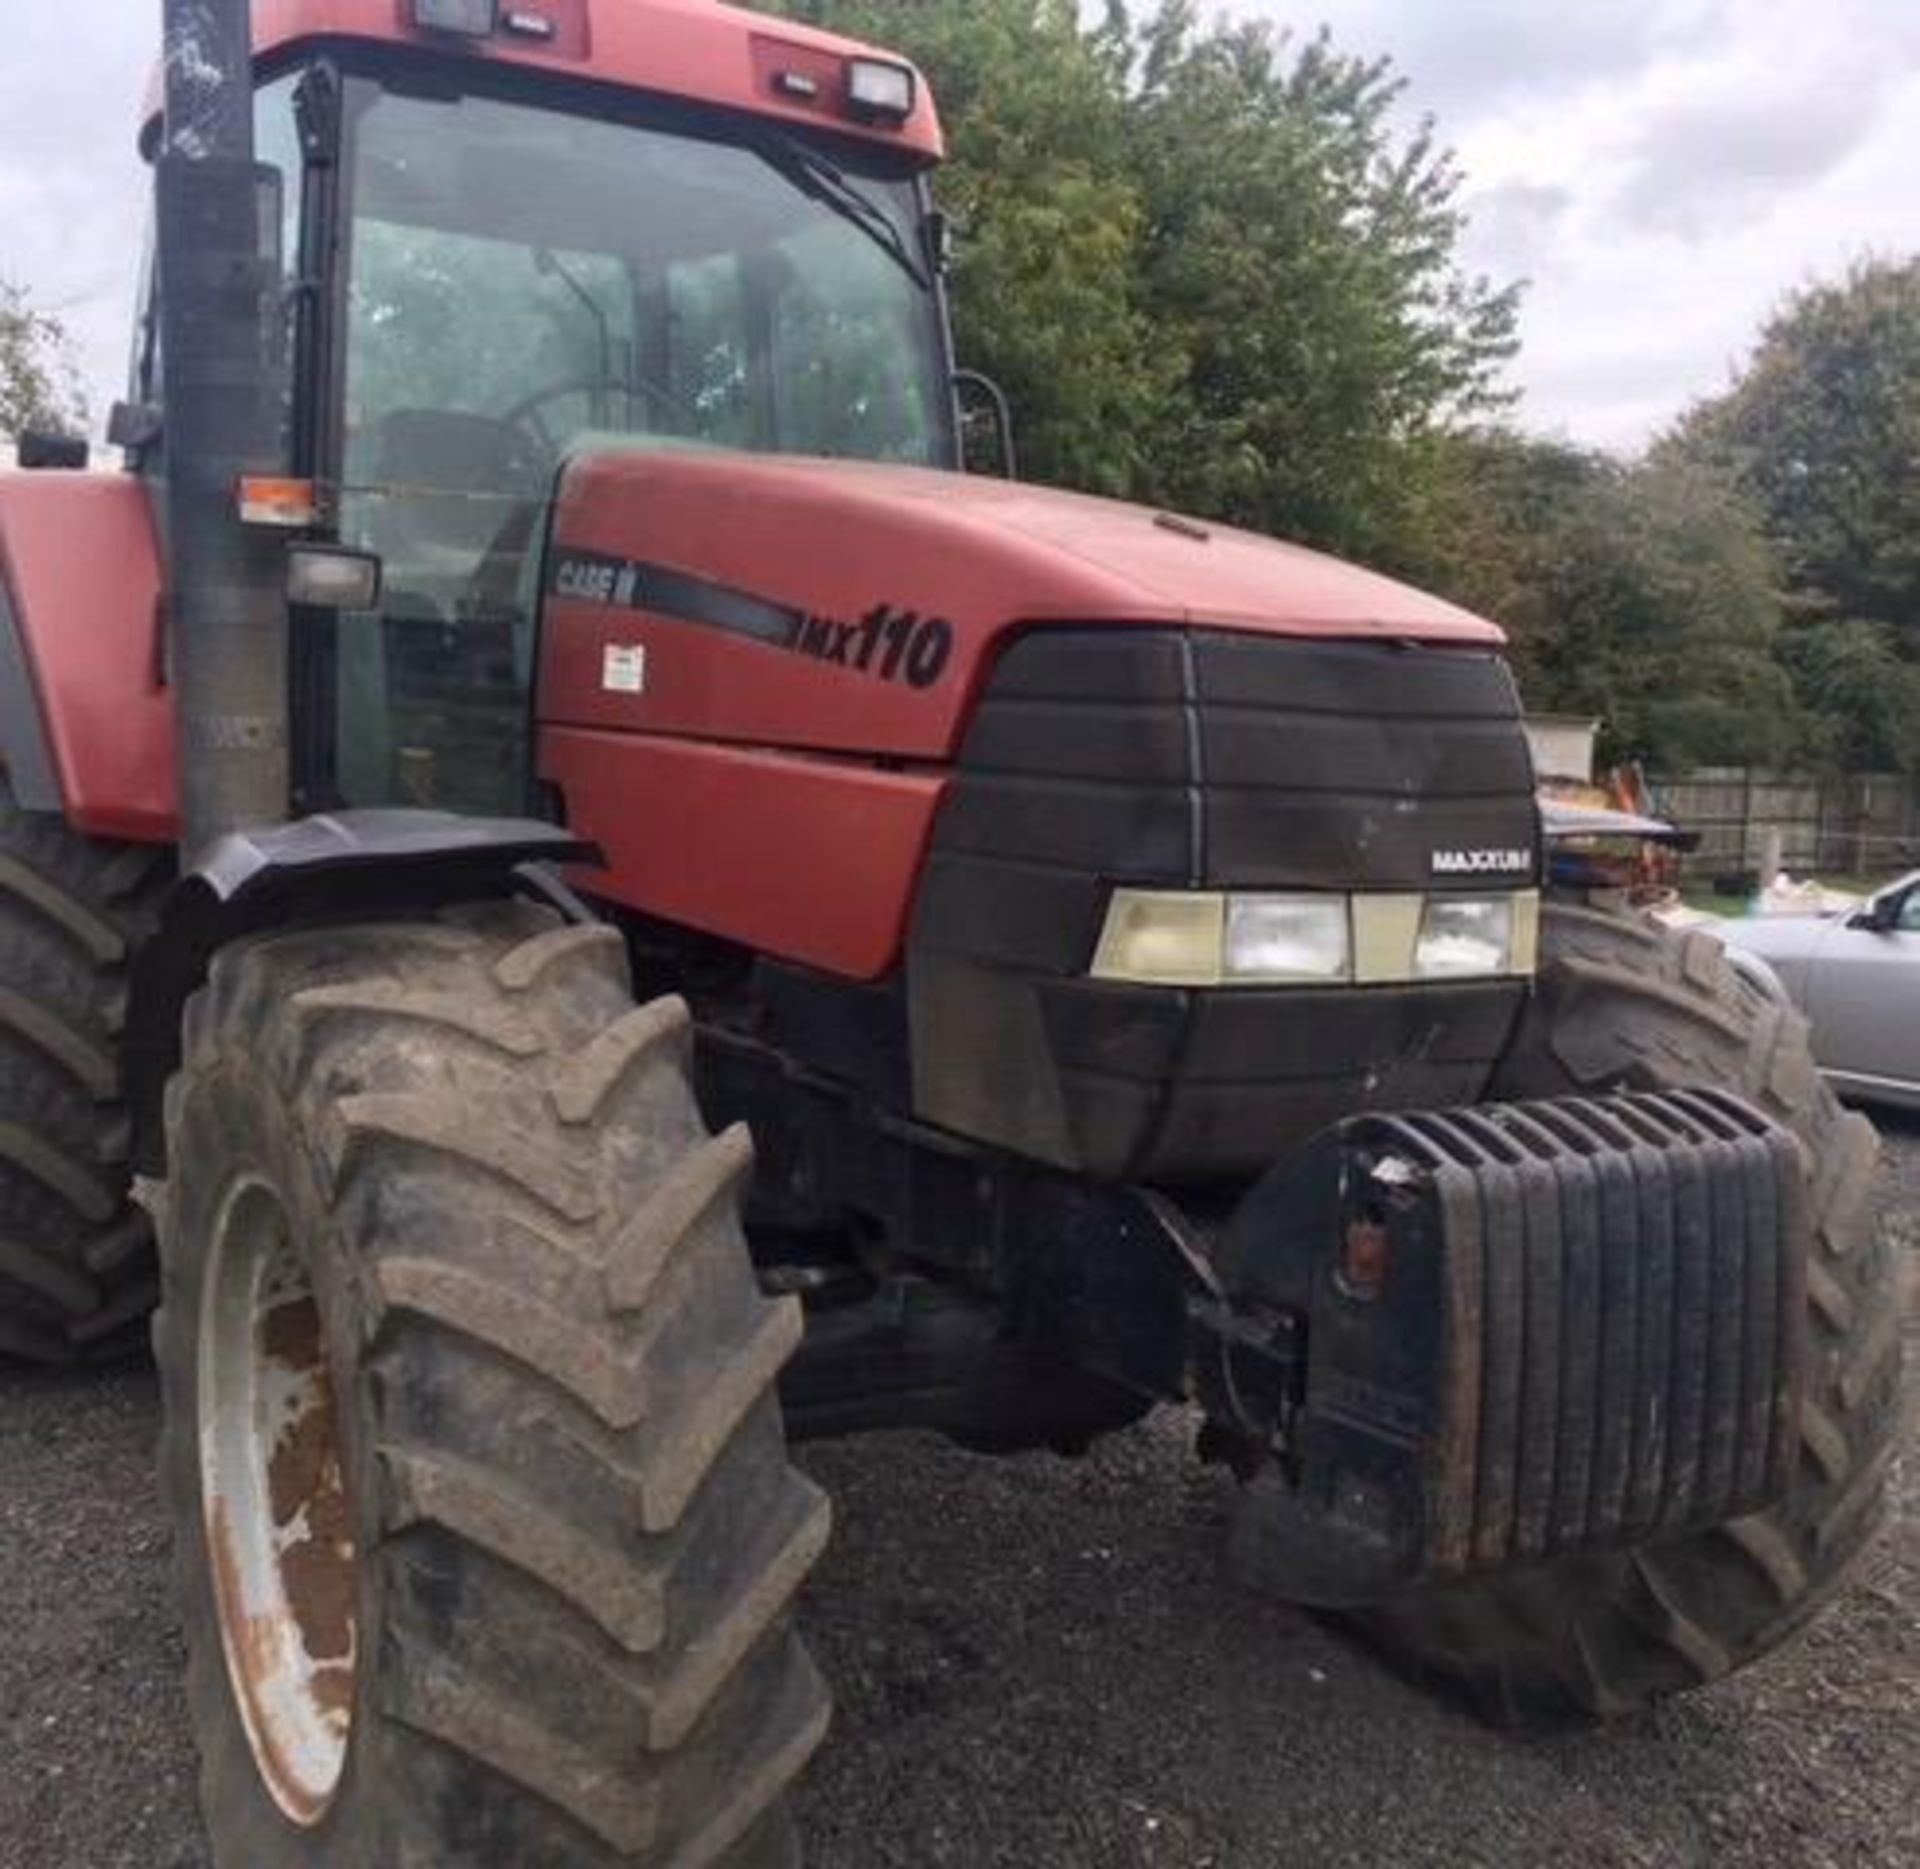 2002 CASE MX 110 TRACTOR - STARTS WON’T DRIVE - WEIGHTS NOT INCLUDED